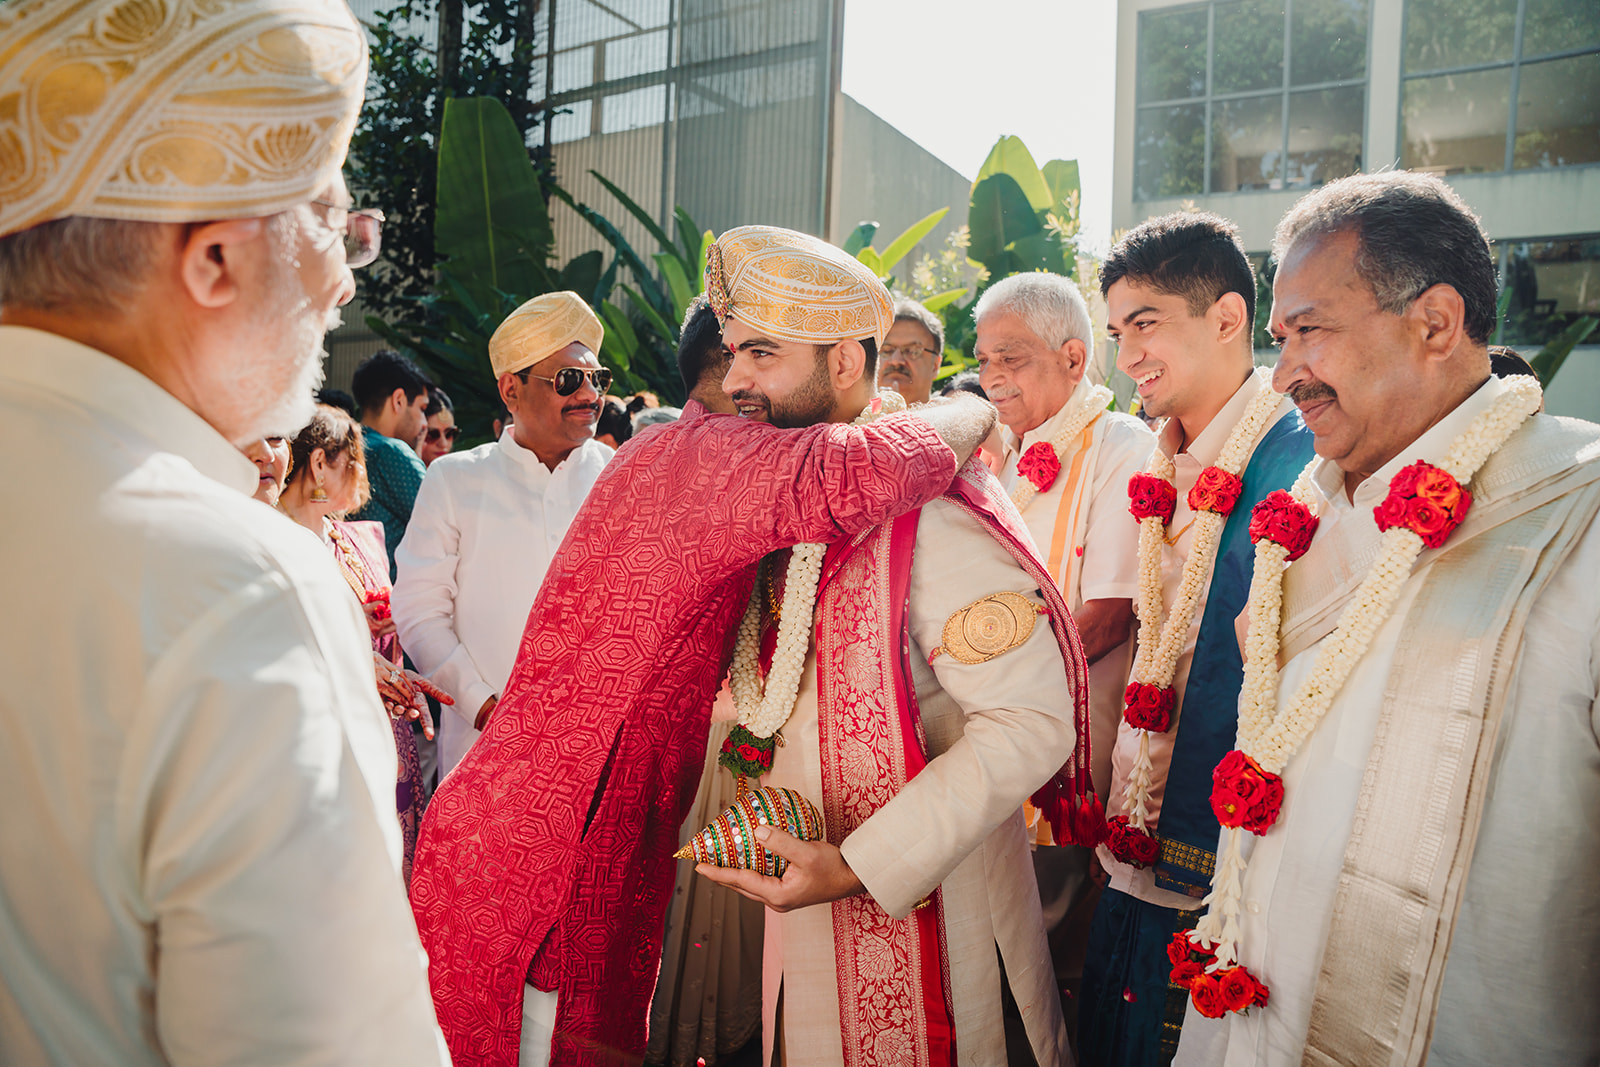 Celebratory embrace: A heartwarming moment as guests greet the groom with smiles and enthusiasm